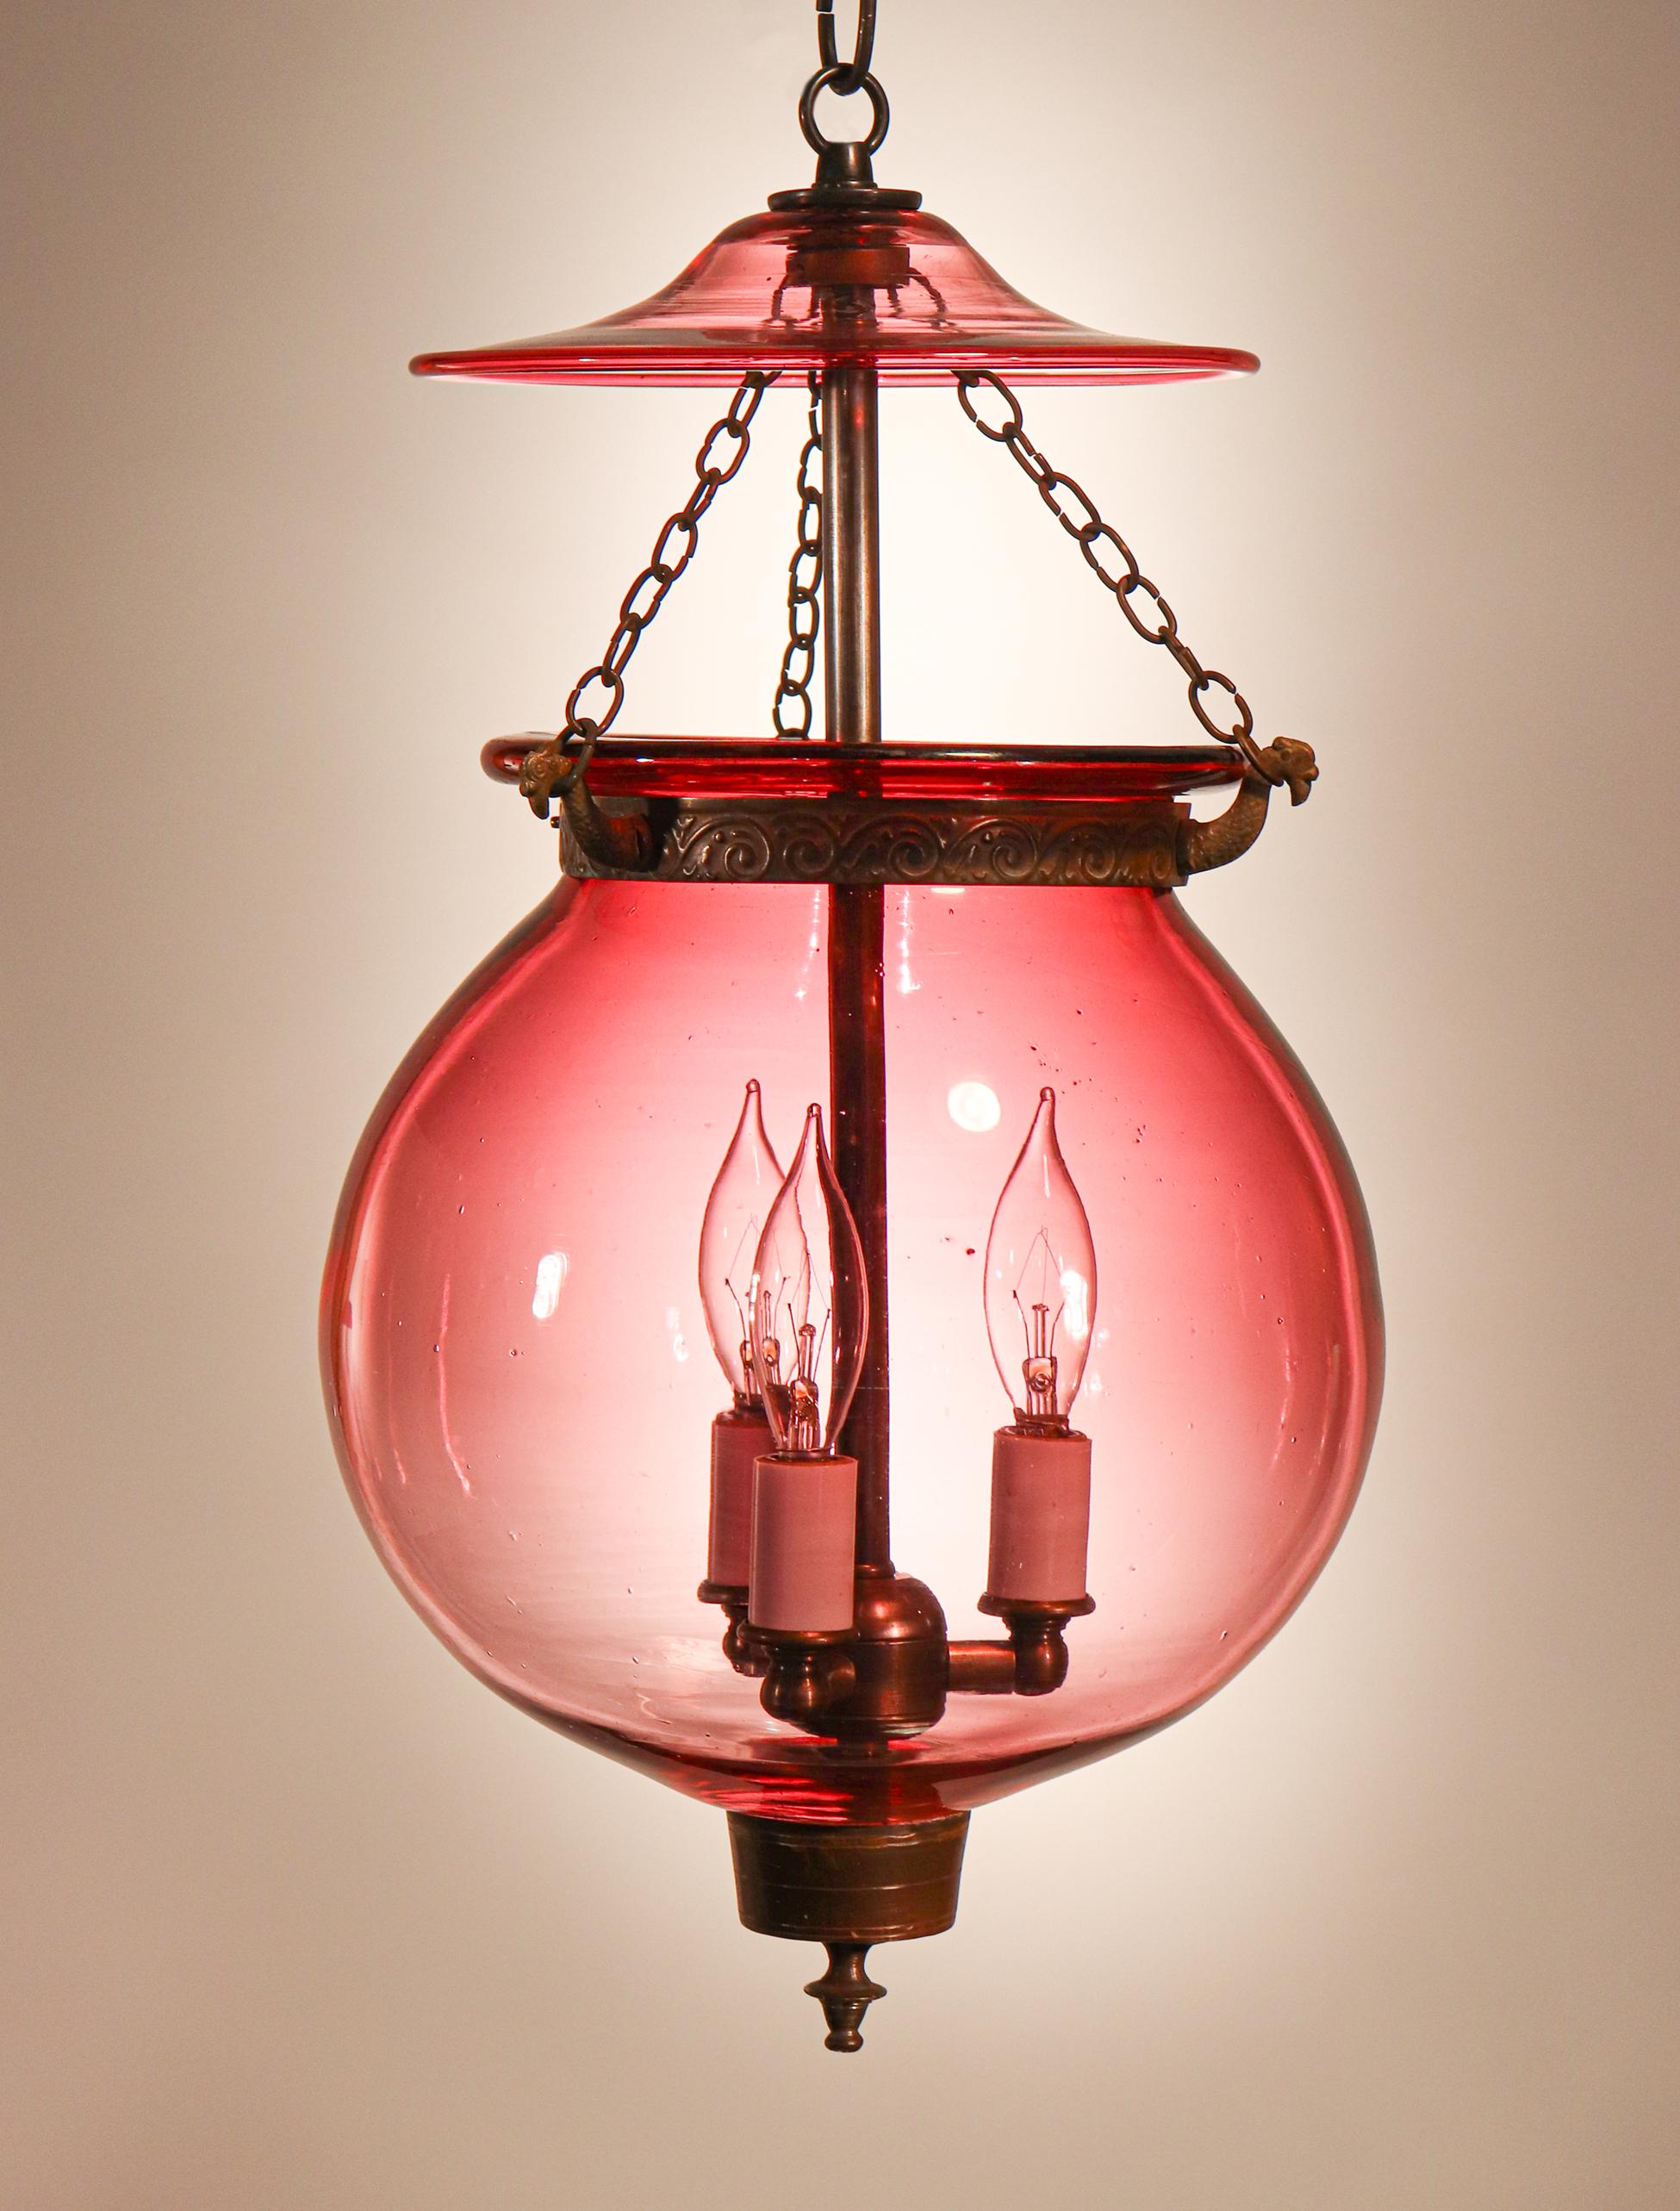 An exceptional lantern in our bell jar collection, this circa 1870 globe pendant has pleasing form and its cranberry hue casts a warm, comfortable light. The quality of the hand blown glass is very good, with desirable air bubbles and swirls in the